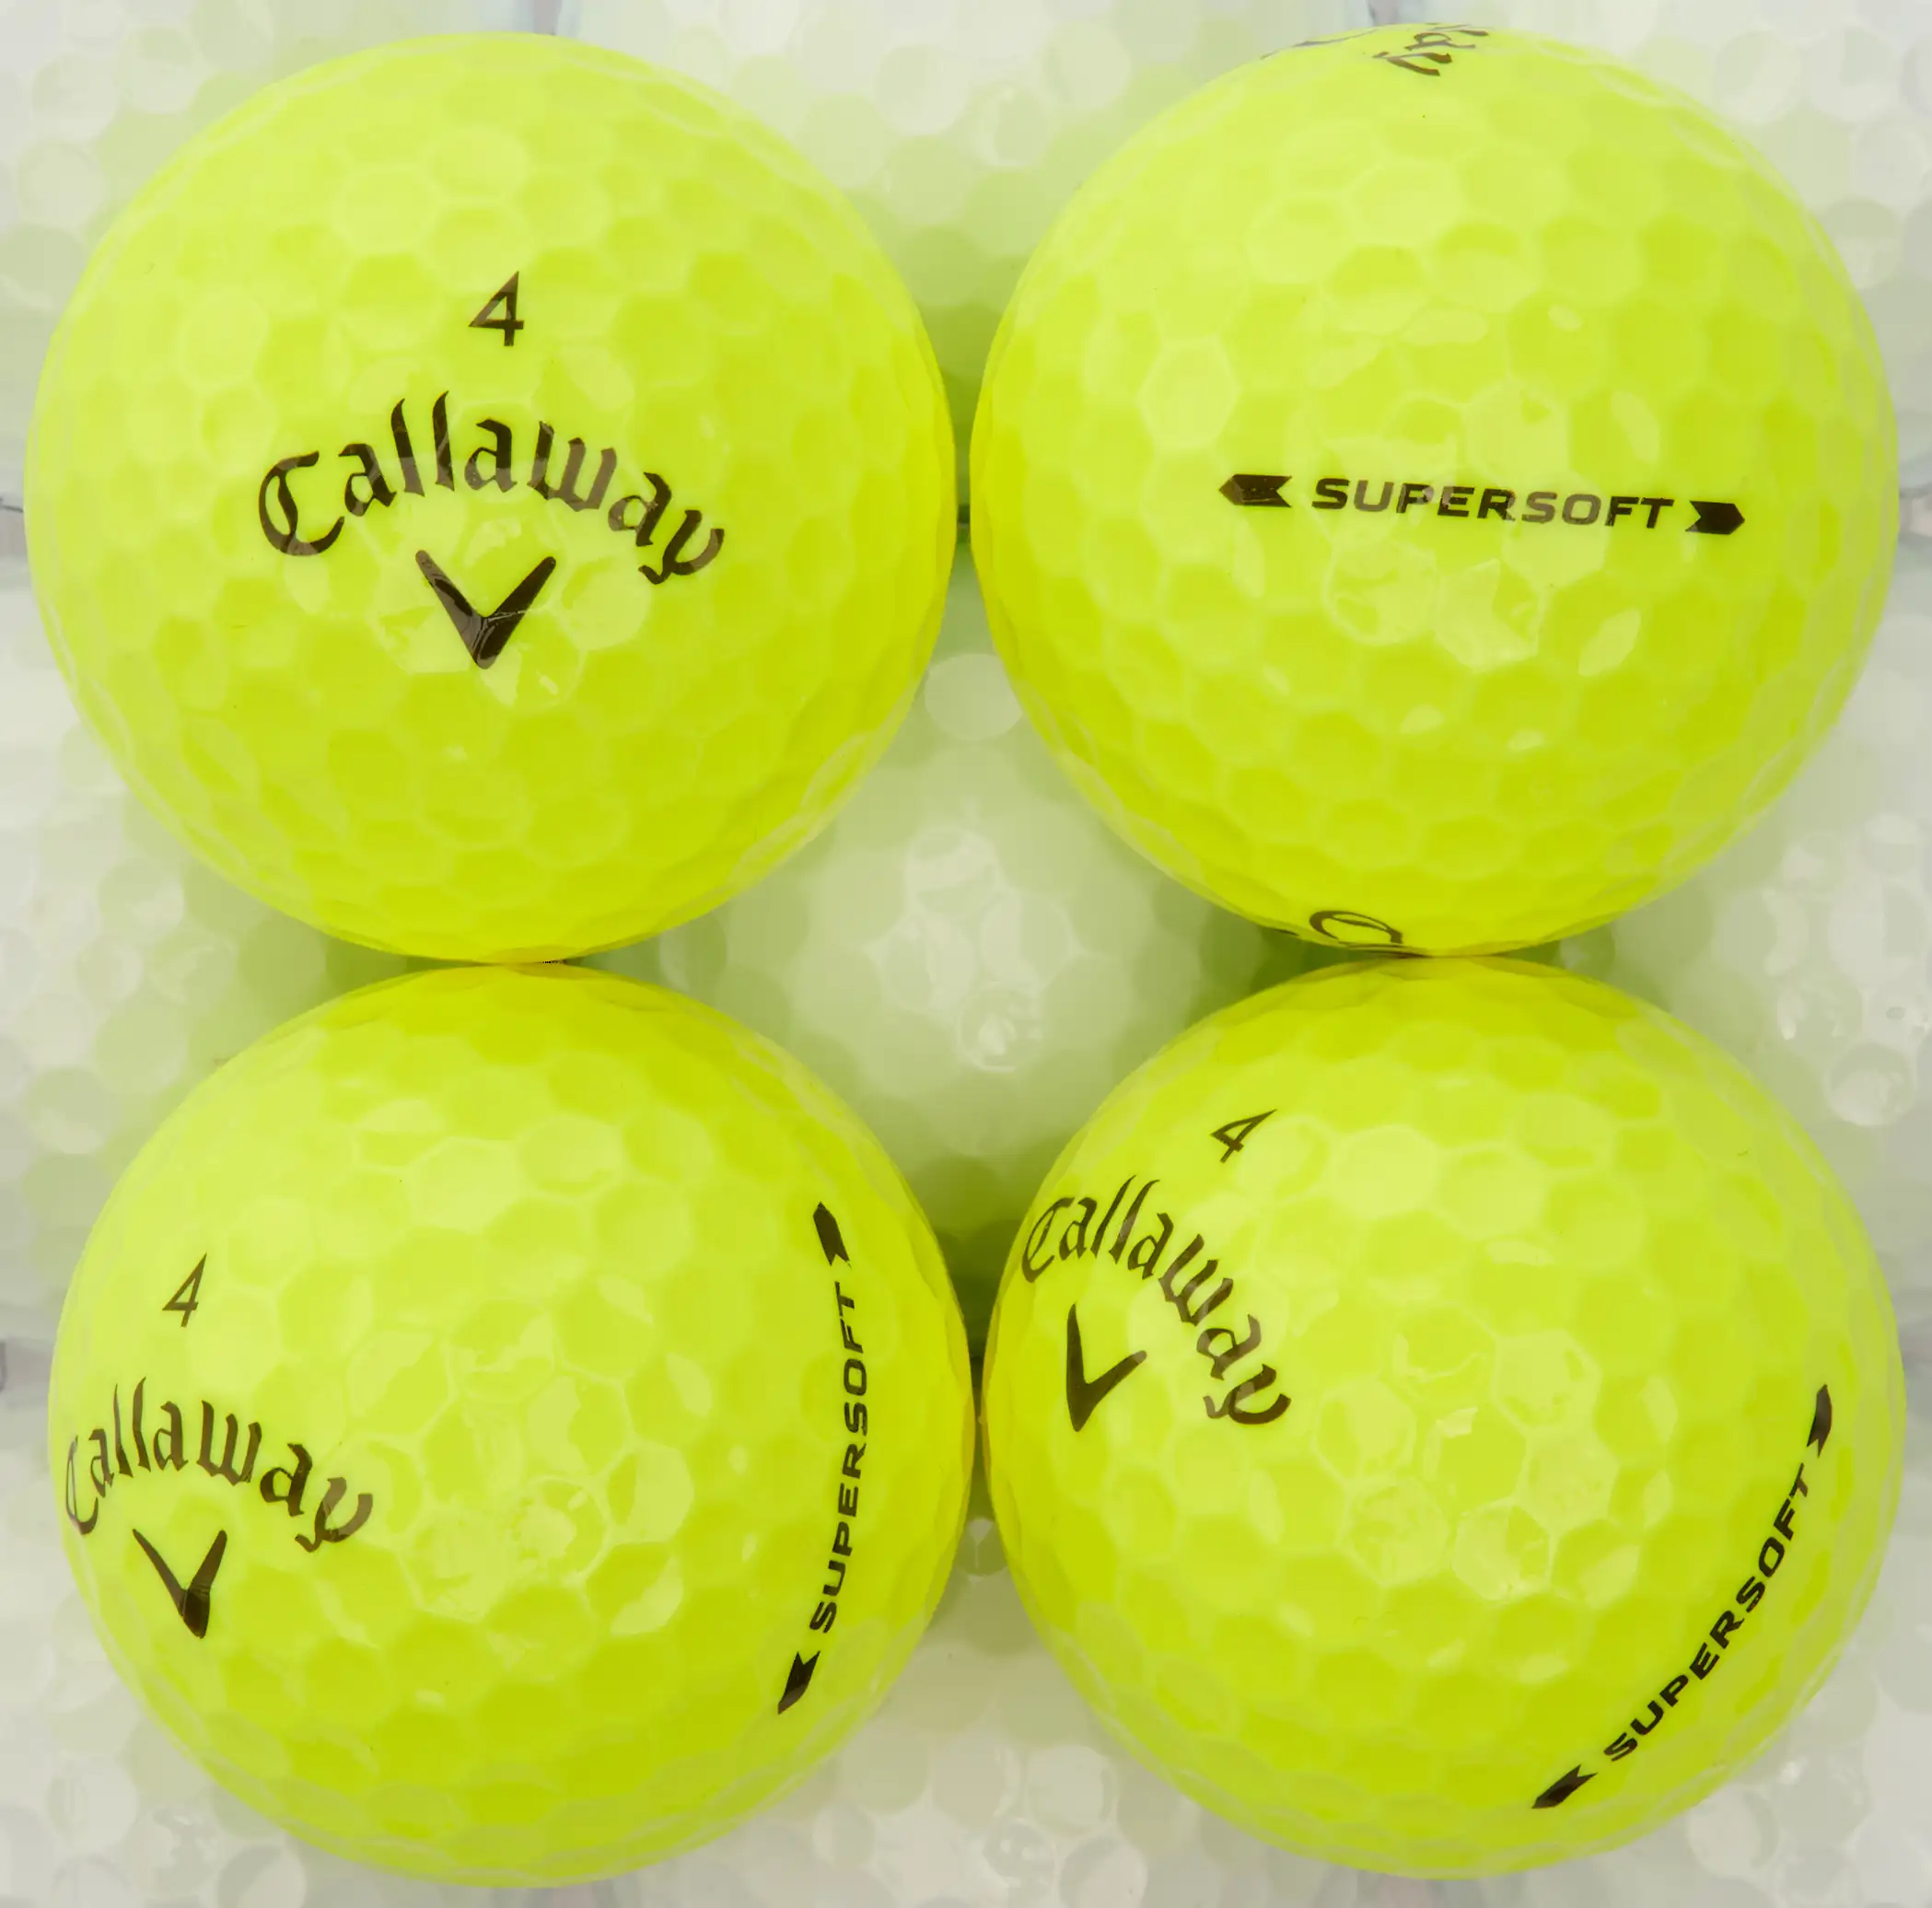 Callaway Supersoft, yellow